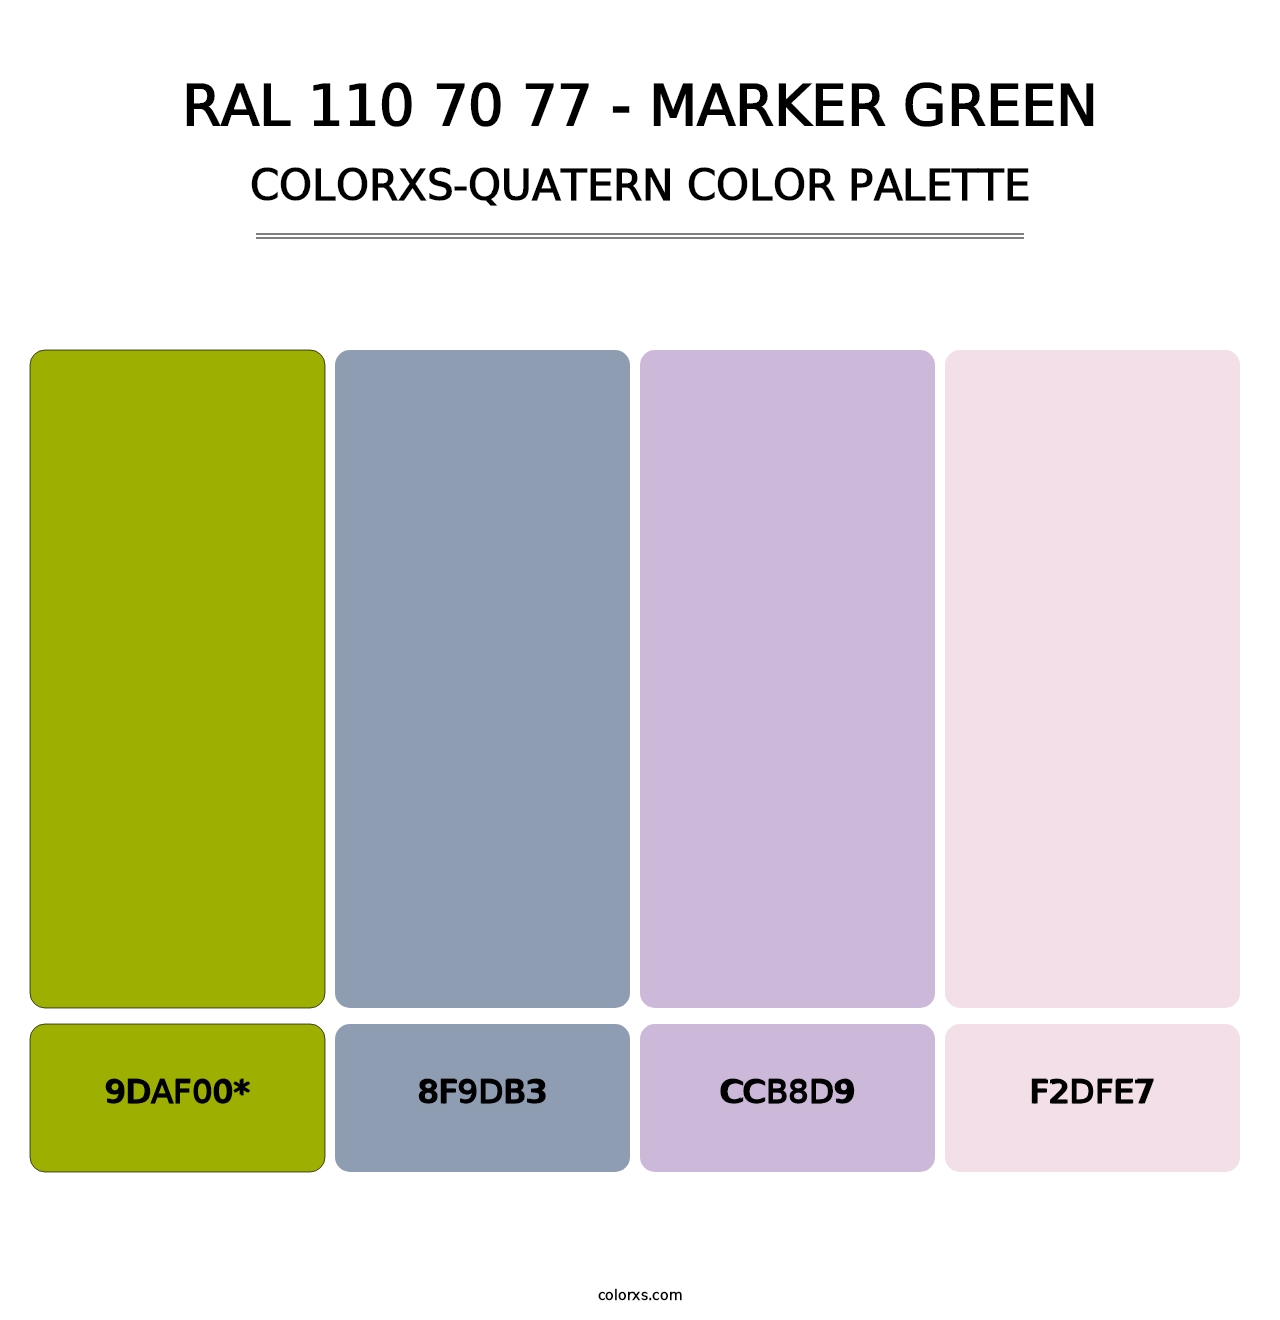 RAL 110 70 77 - Marker Green - Colorxs Quatern Palette